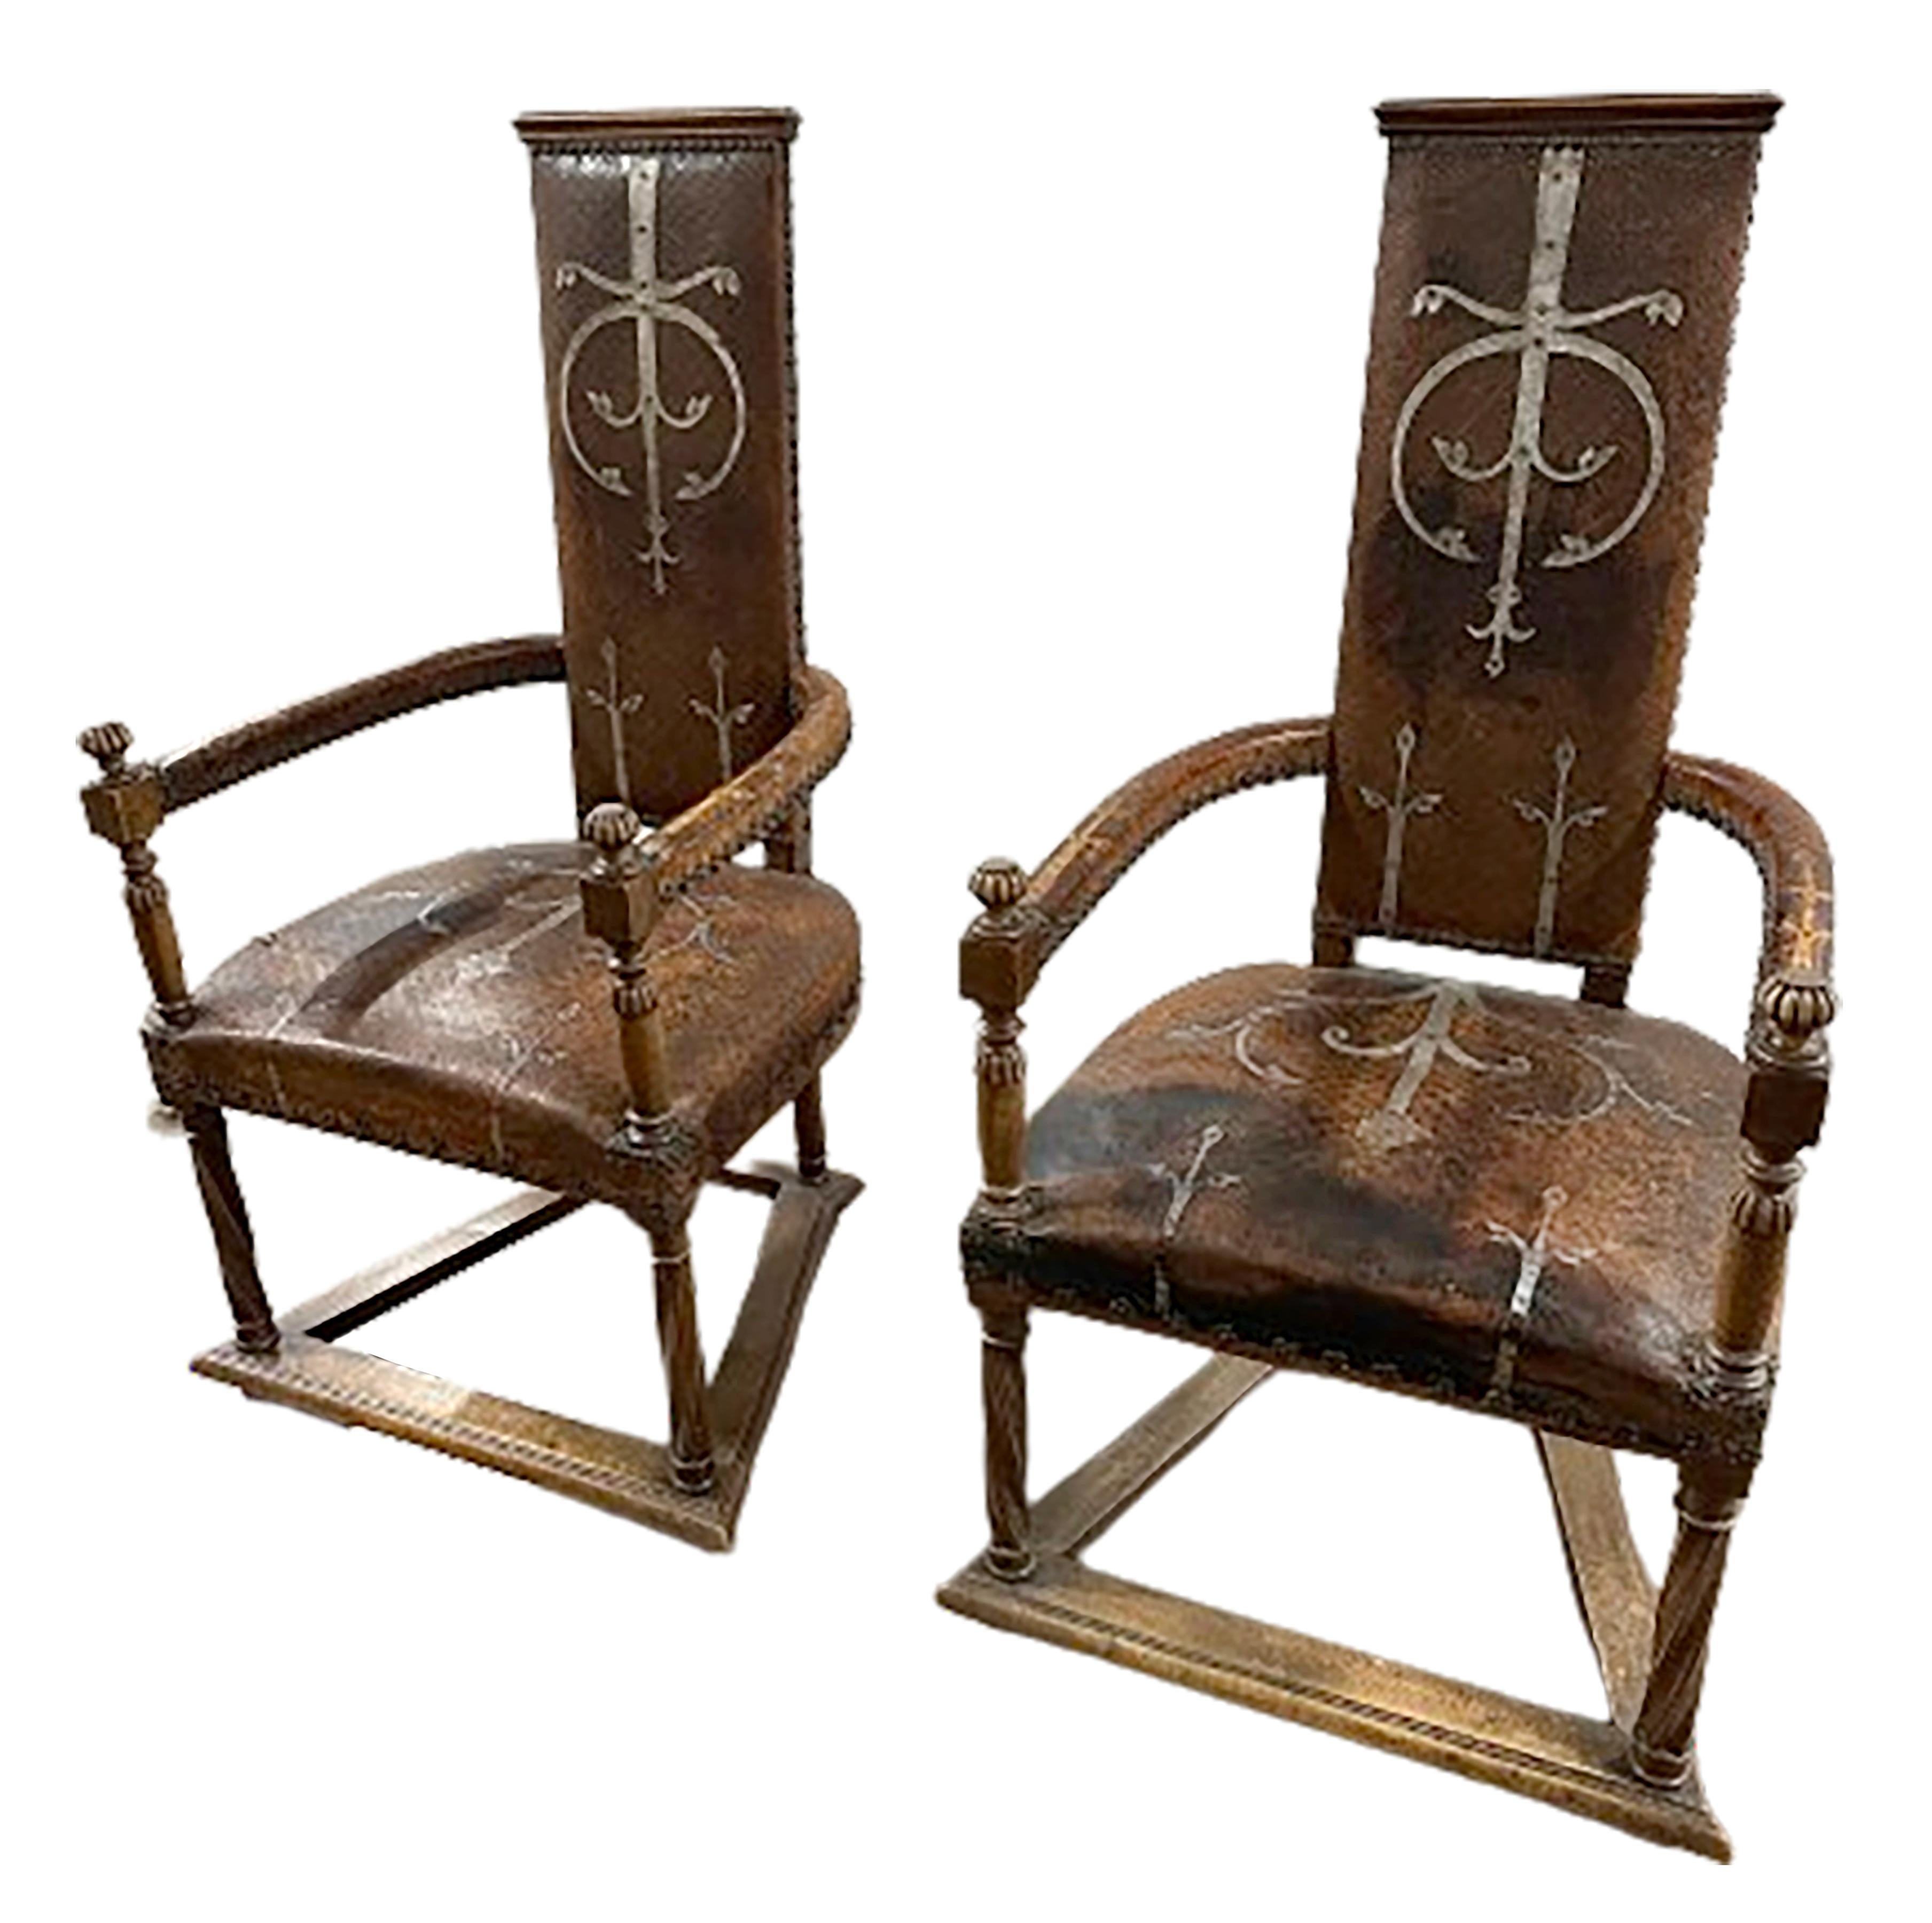 An exquisite pair of Mid-19th Century studded leather Spanish armchairs. Featuring tall, slender backrests crowned with subtle arches and grand out-swinging arms, each chair is adorned with chocolate-colored leather upholstery embossed and silver